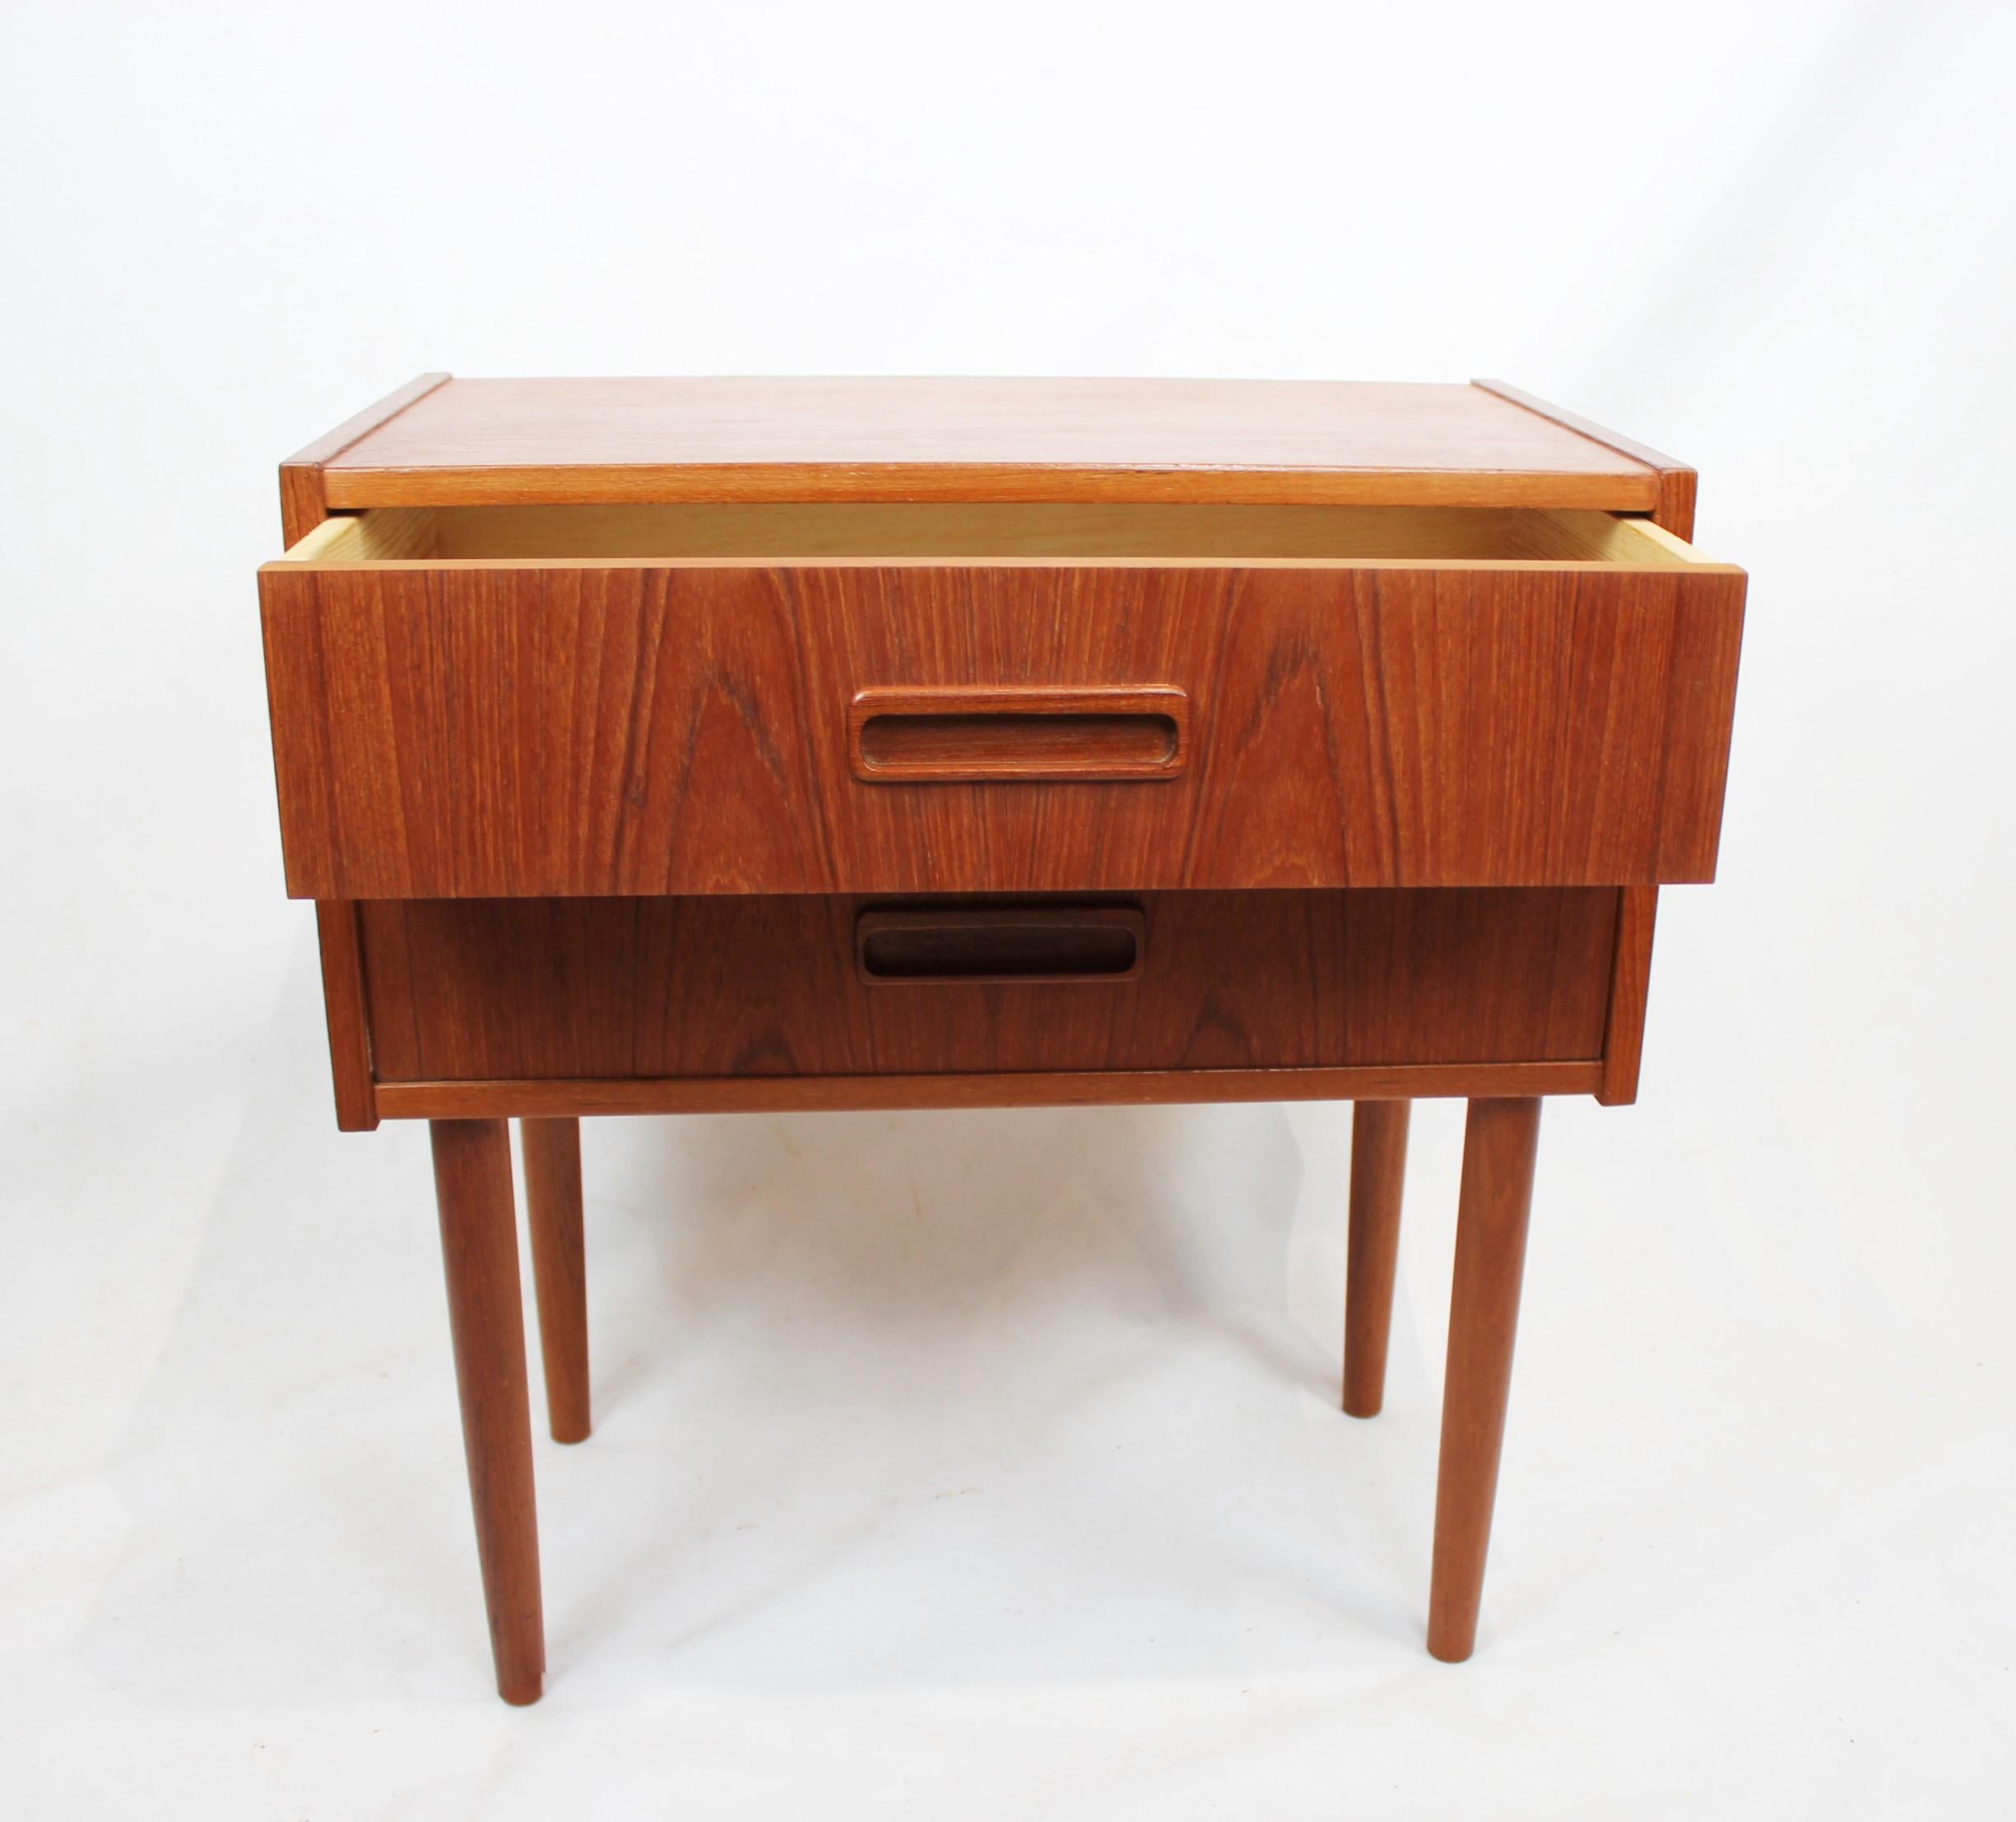 Mid-20th Century Small Chest of Drawers in Teak of Danish Design from the 1960s For Sale